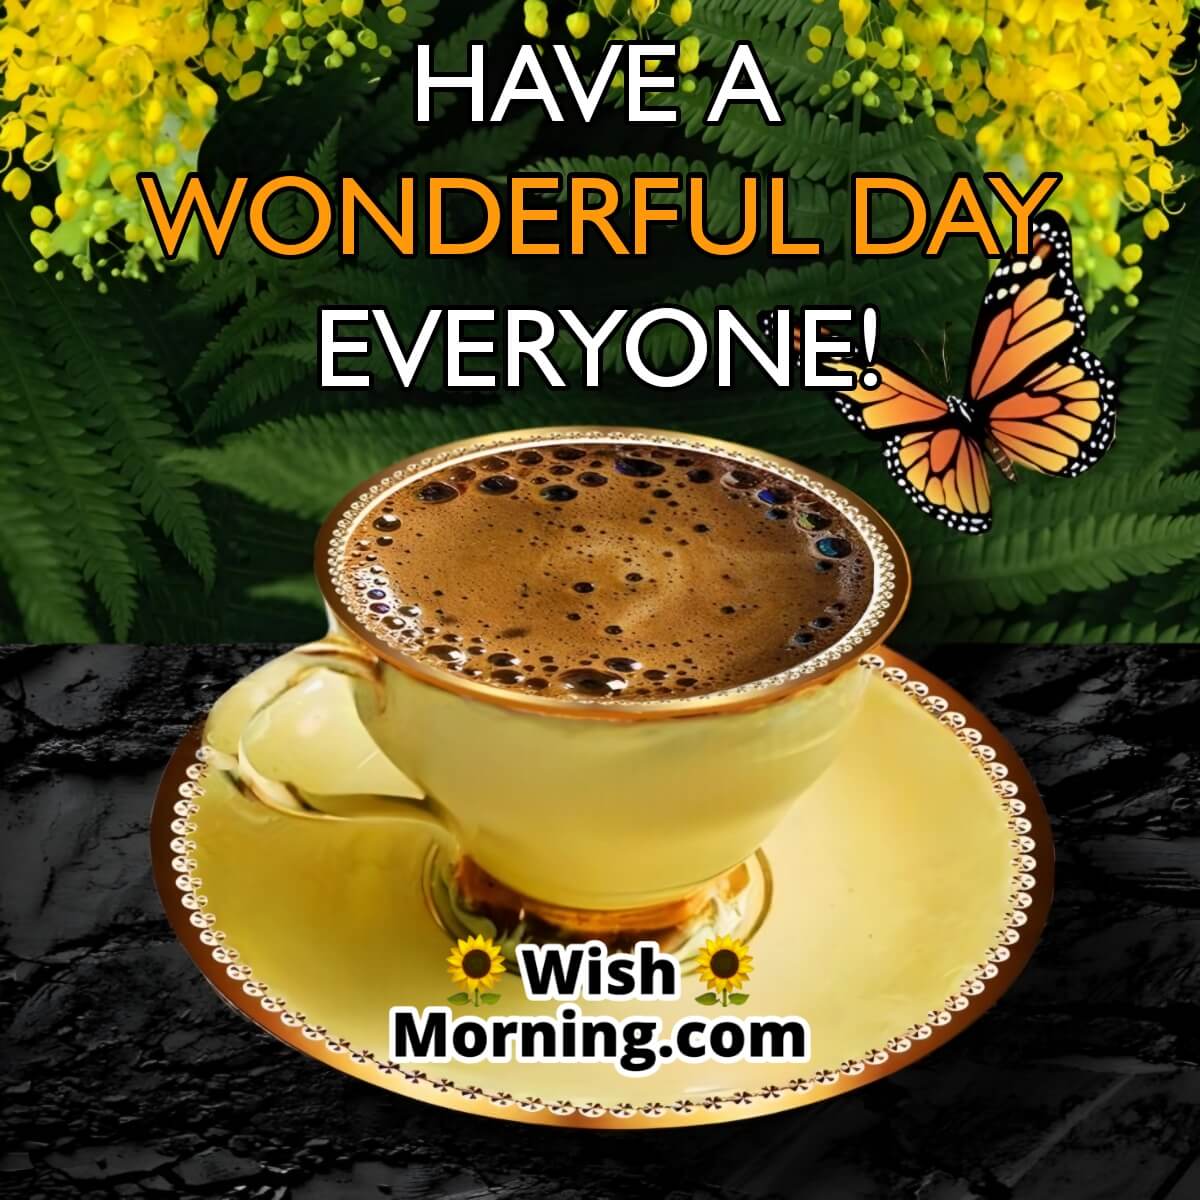 Have A Wonderful Day Everyone!